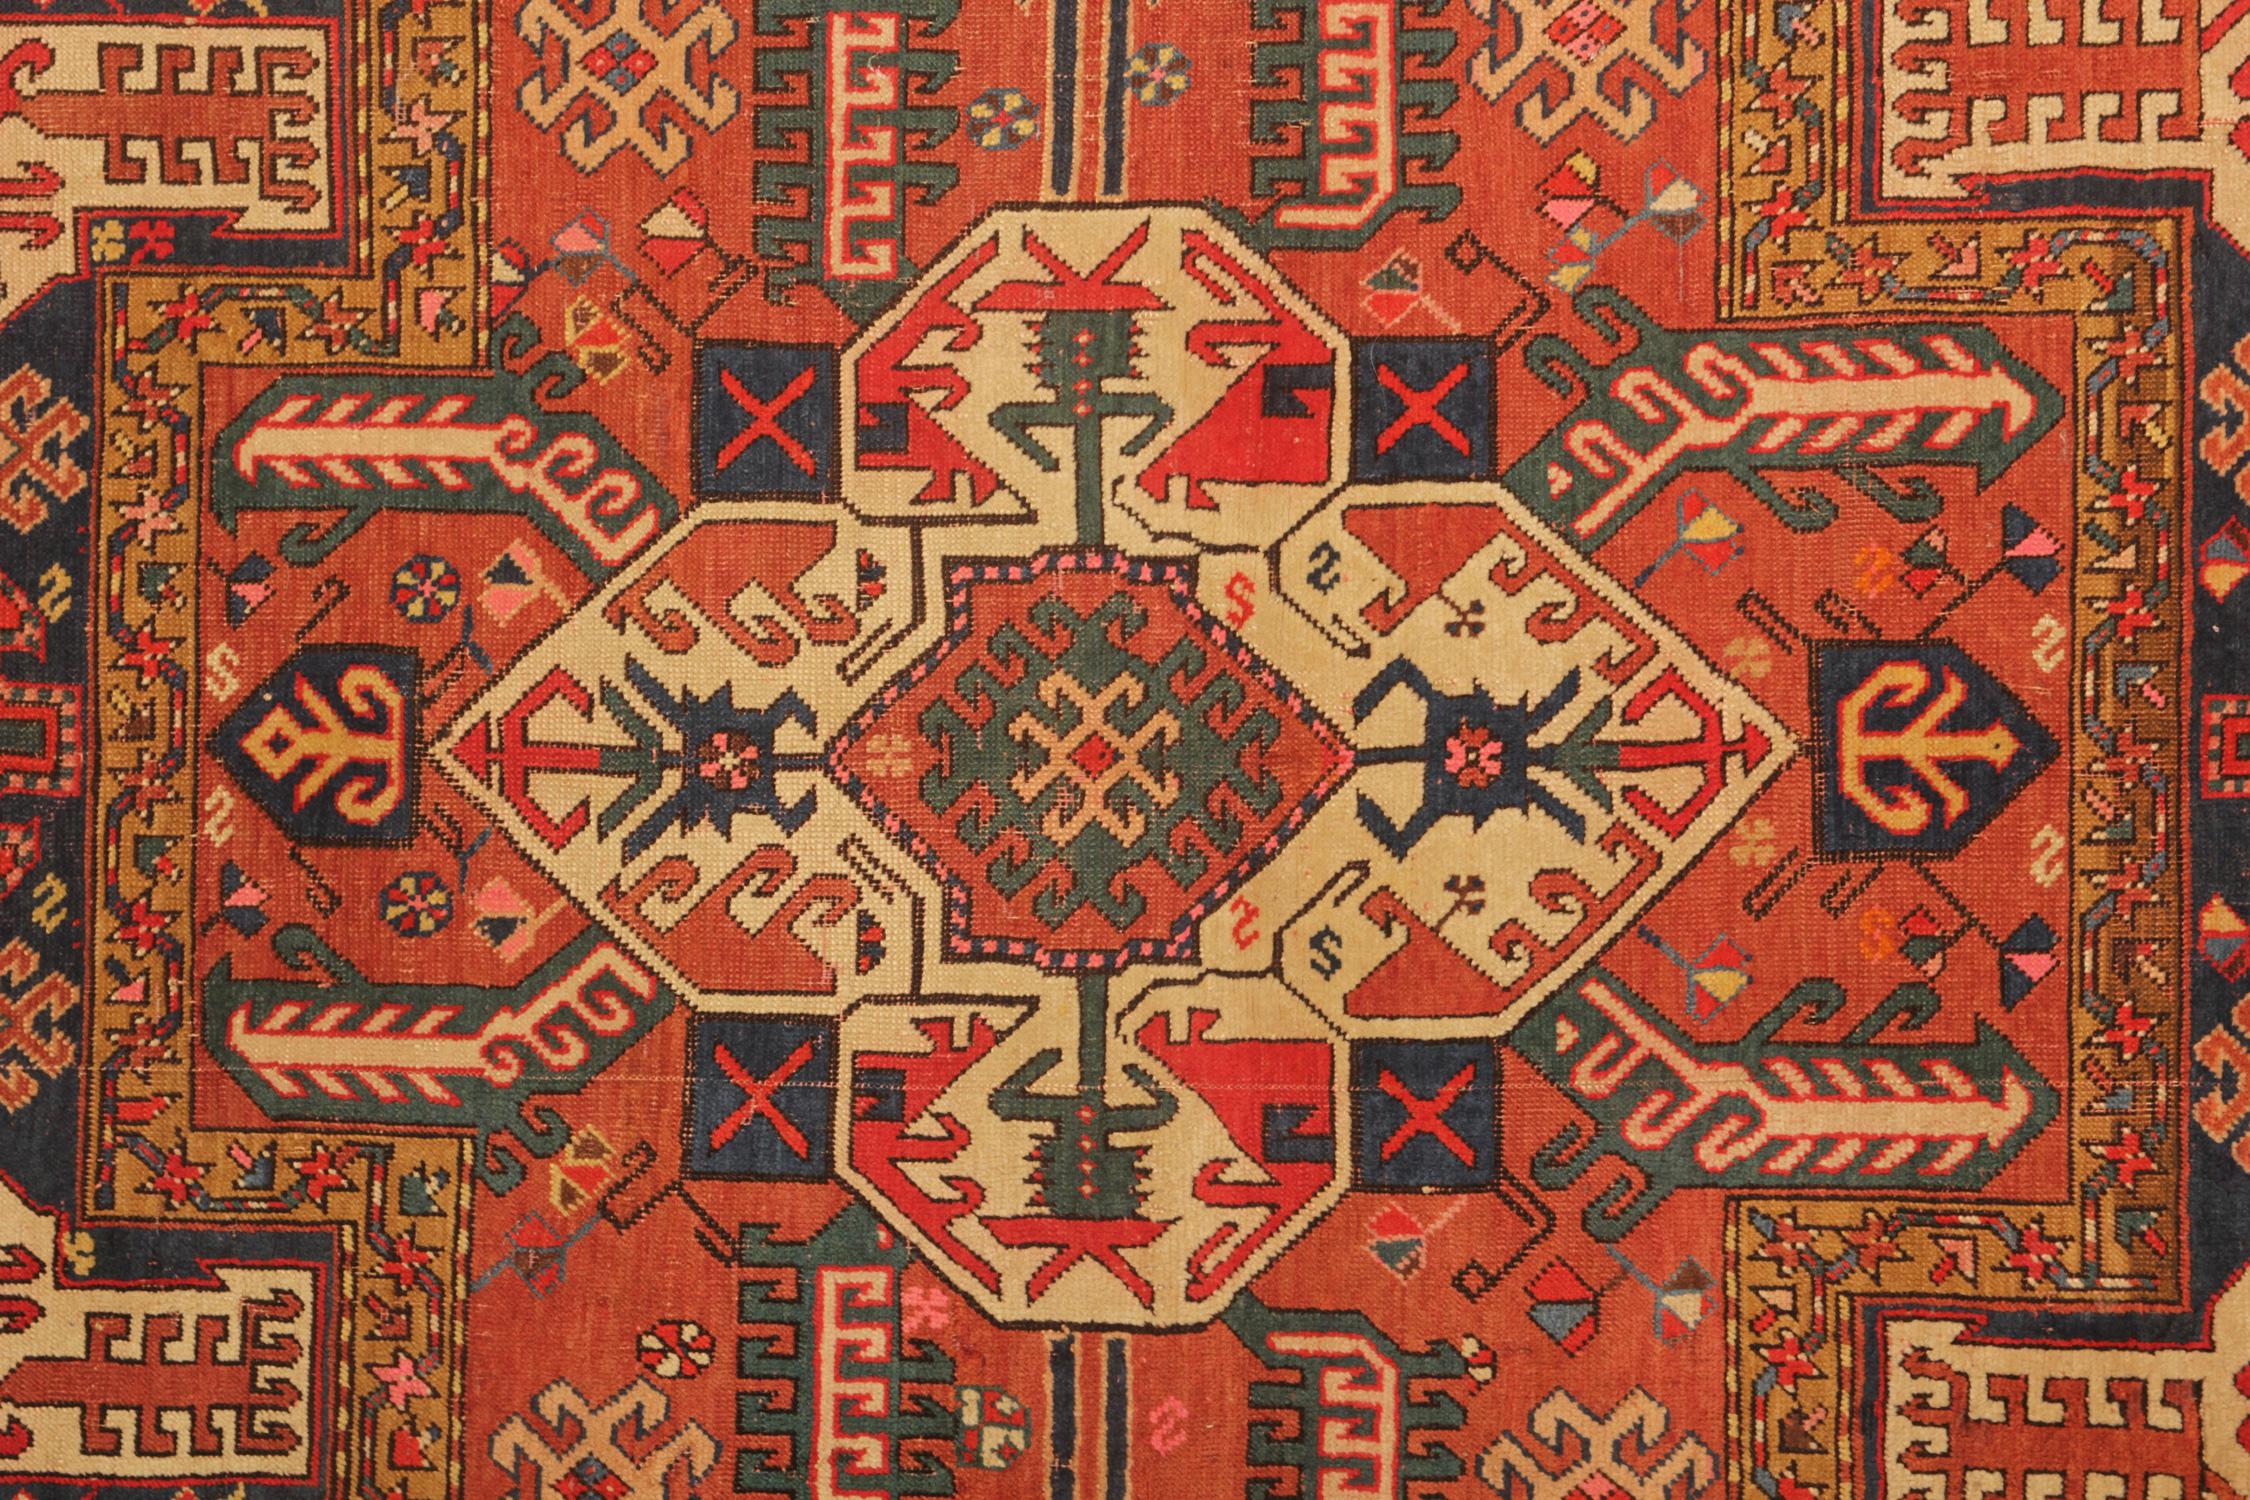 An excellent example of Caucasian handmade carpet rug weaving from the Kazak region of Azerbaijan. Though these orange-red ground all-over patterned rugs may seem like from a distance, this woven rug has a great range of rich organic vegetable dyes